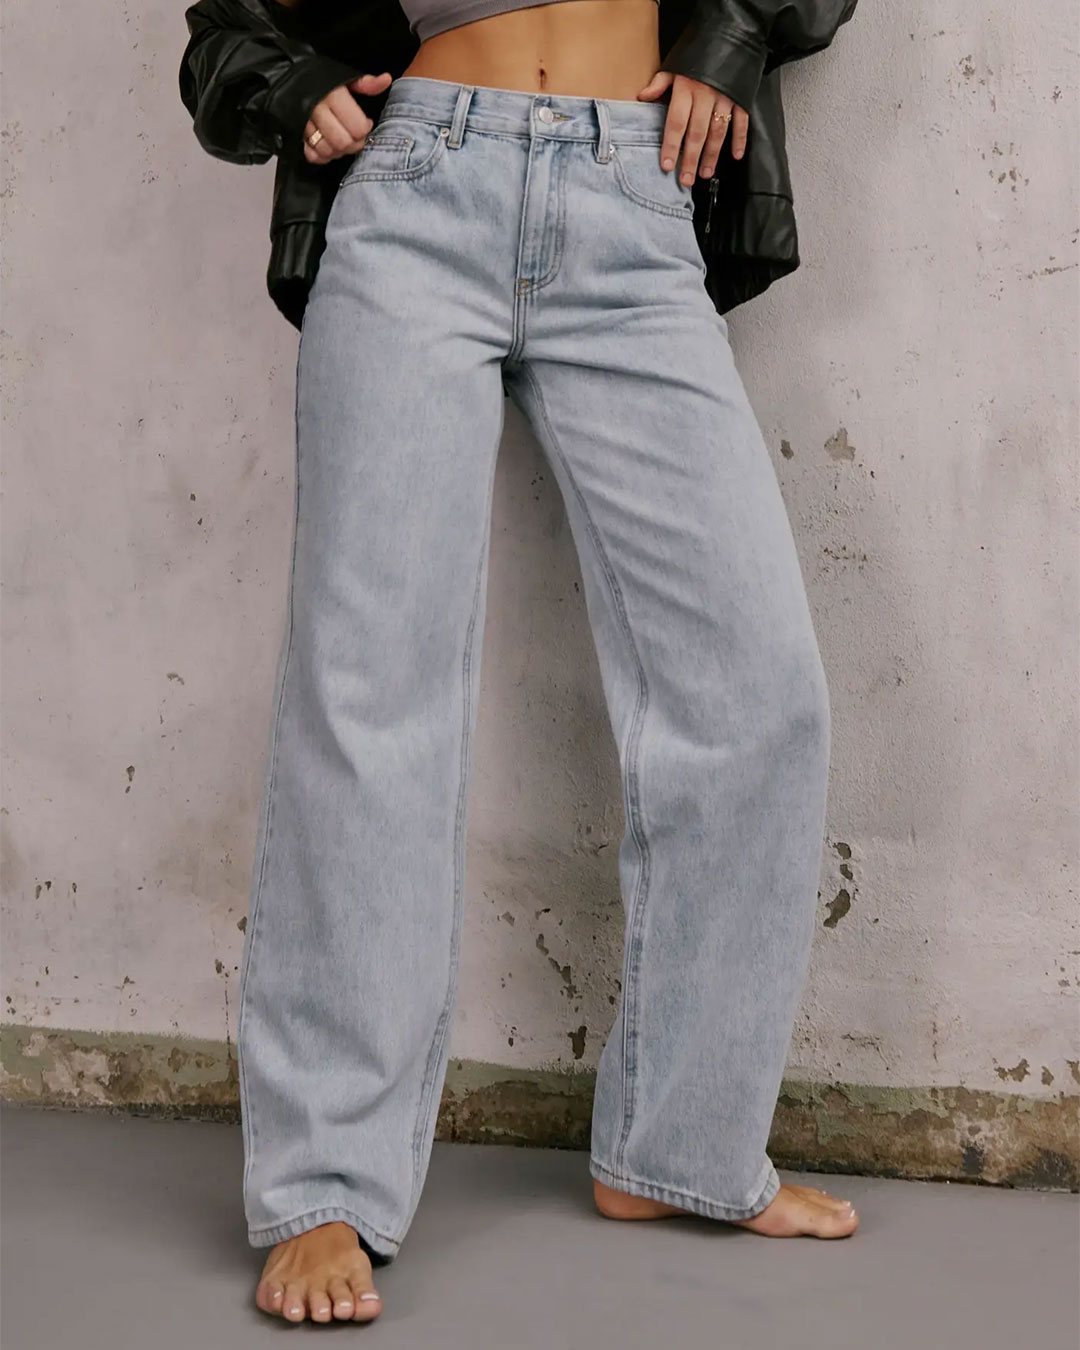 The Best Jeans For Women Based On Reviews 2023